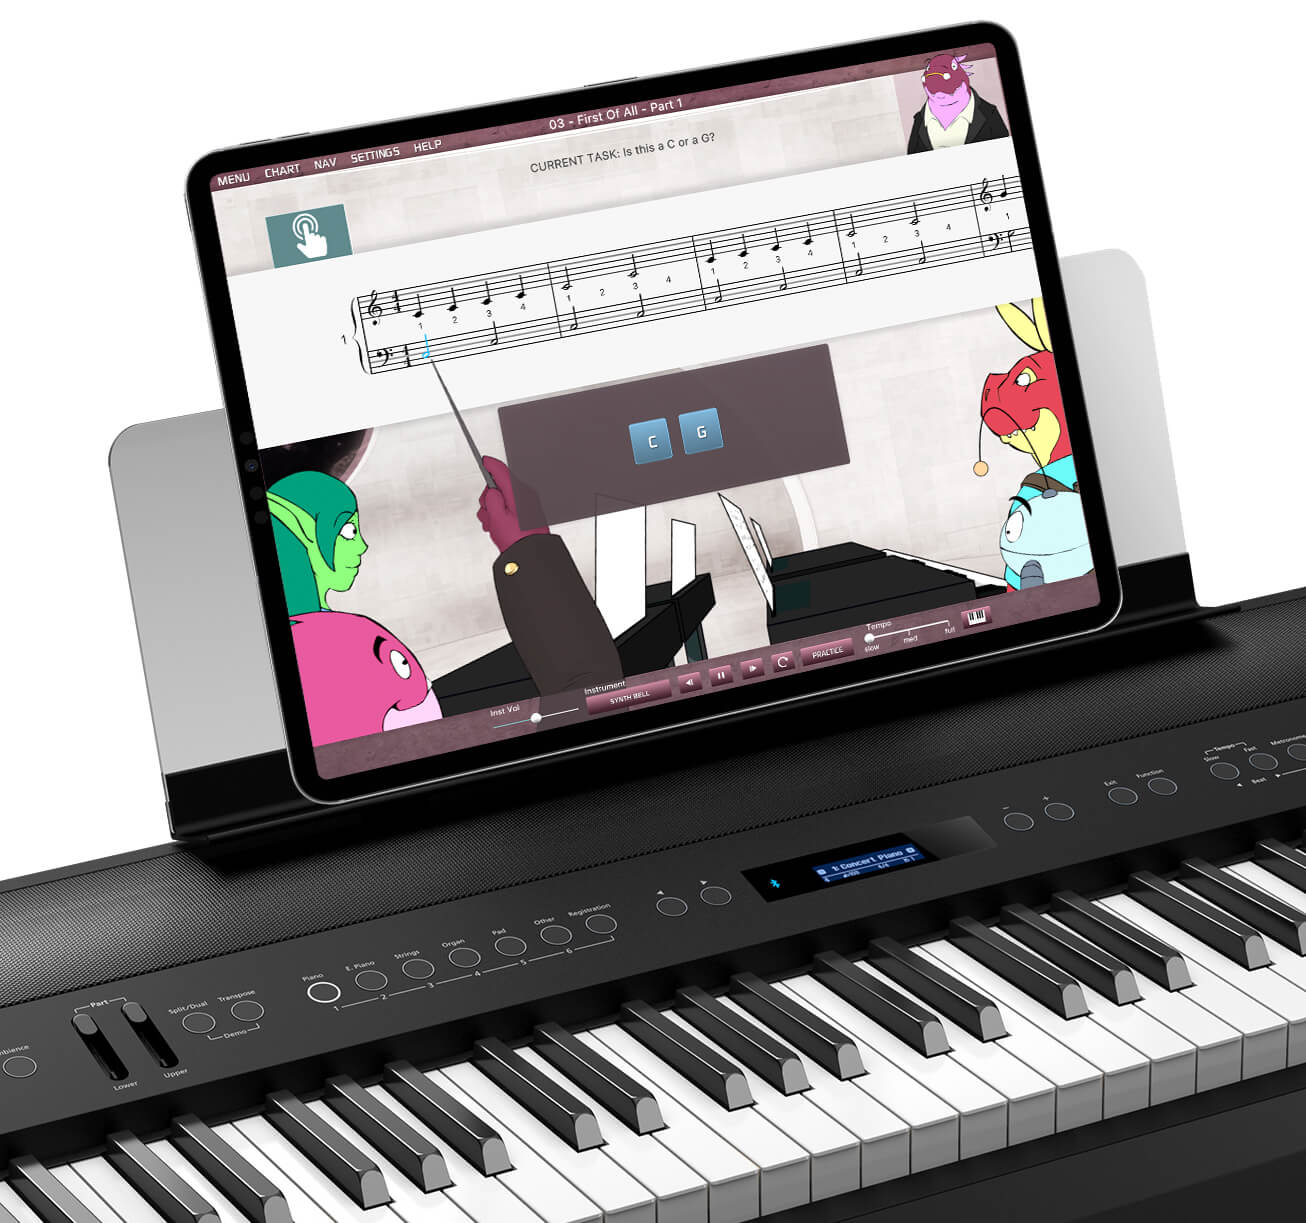 Musiah piano lessons for kids app on iPad with MIDI piano keyboard